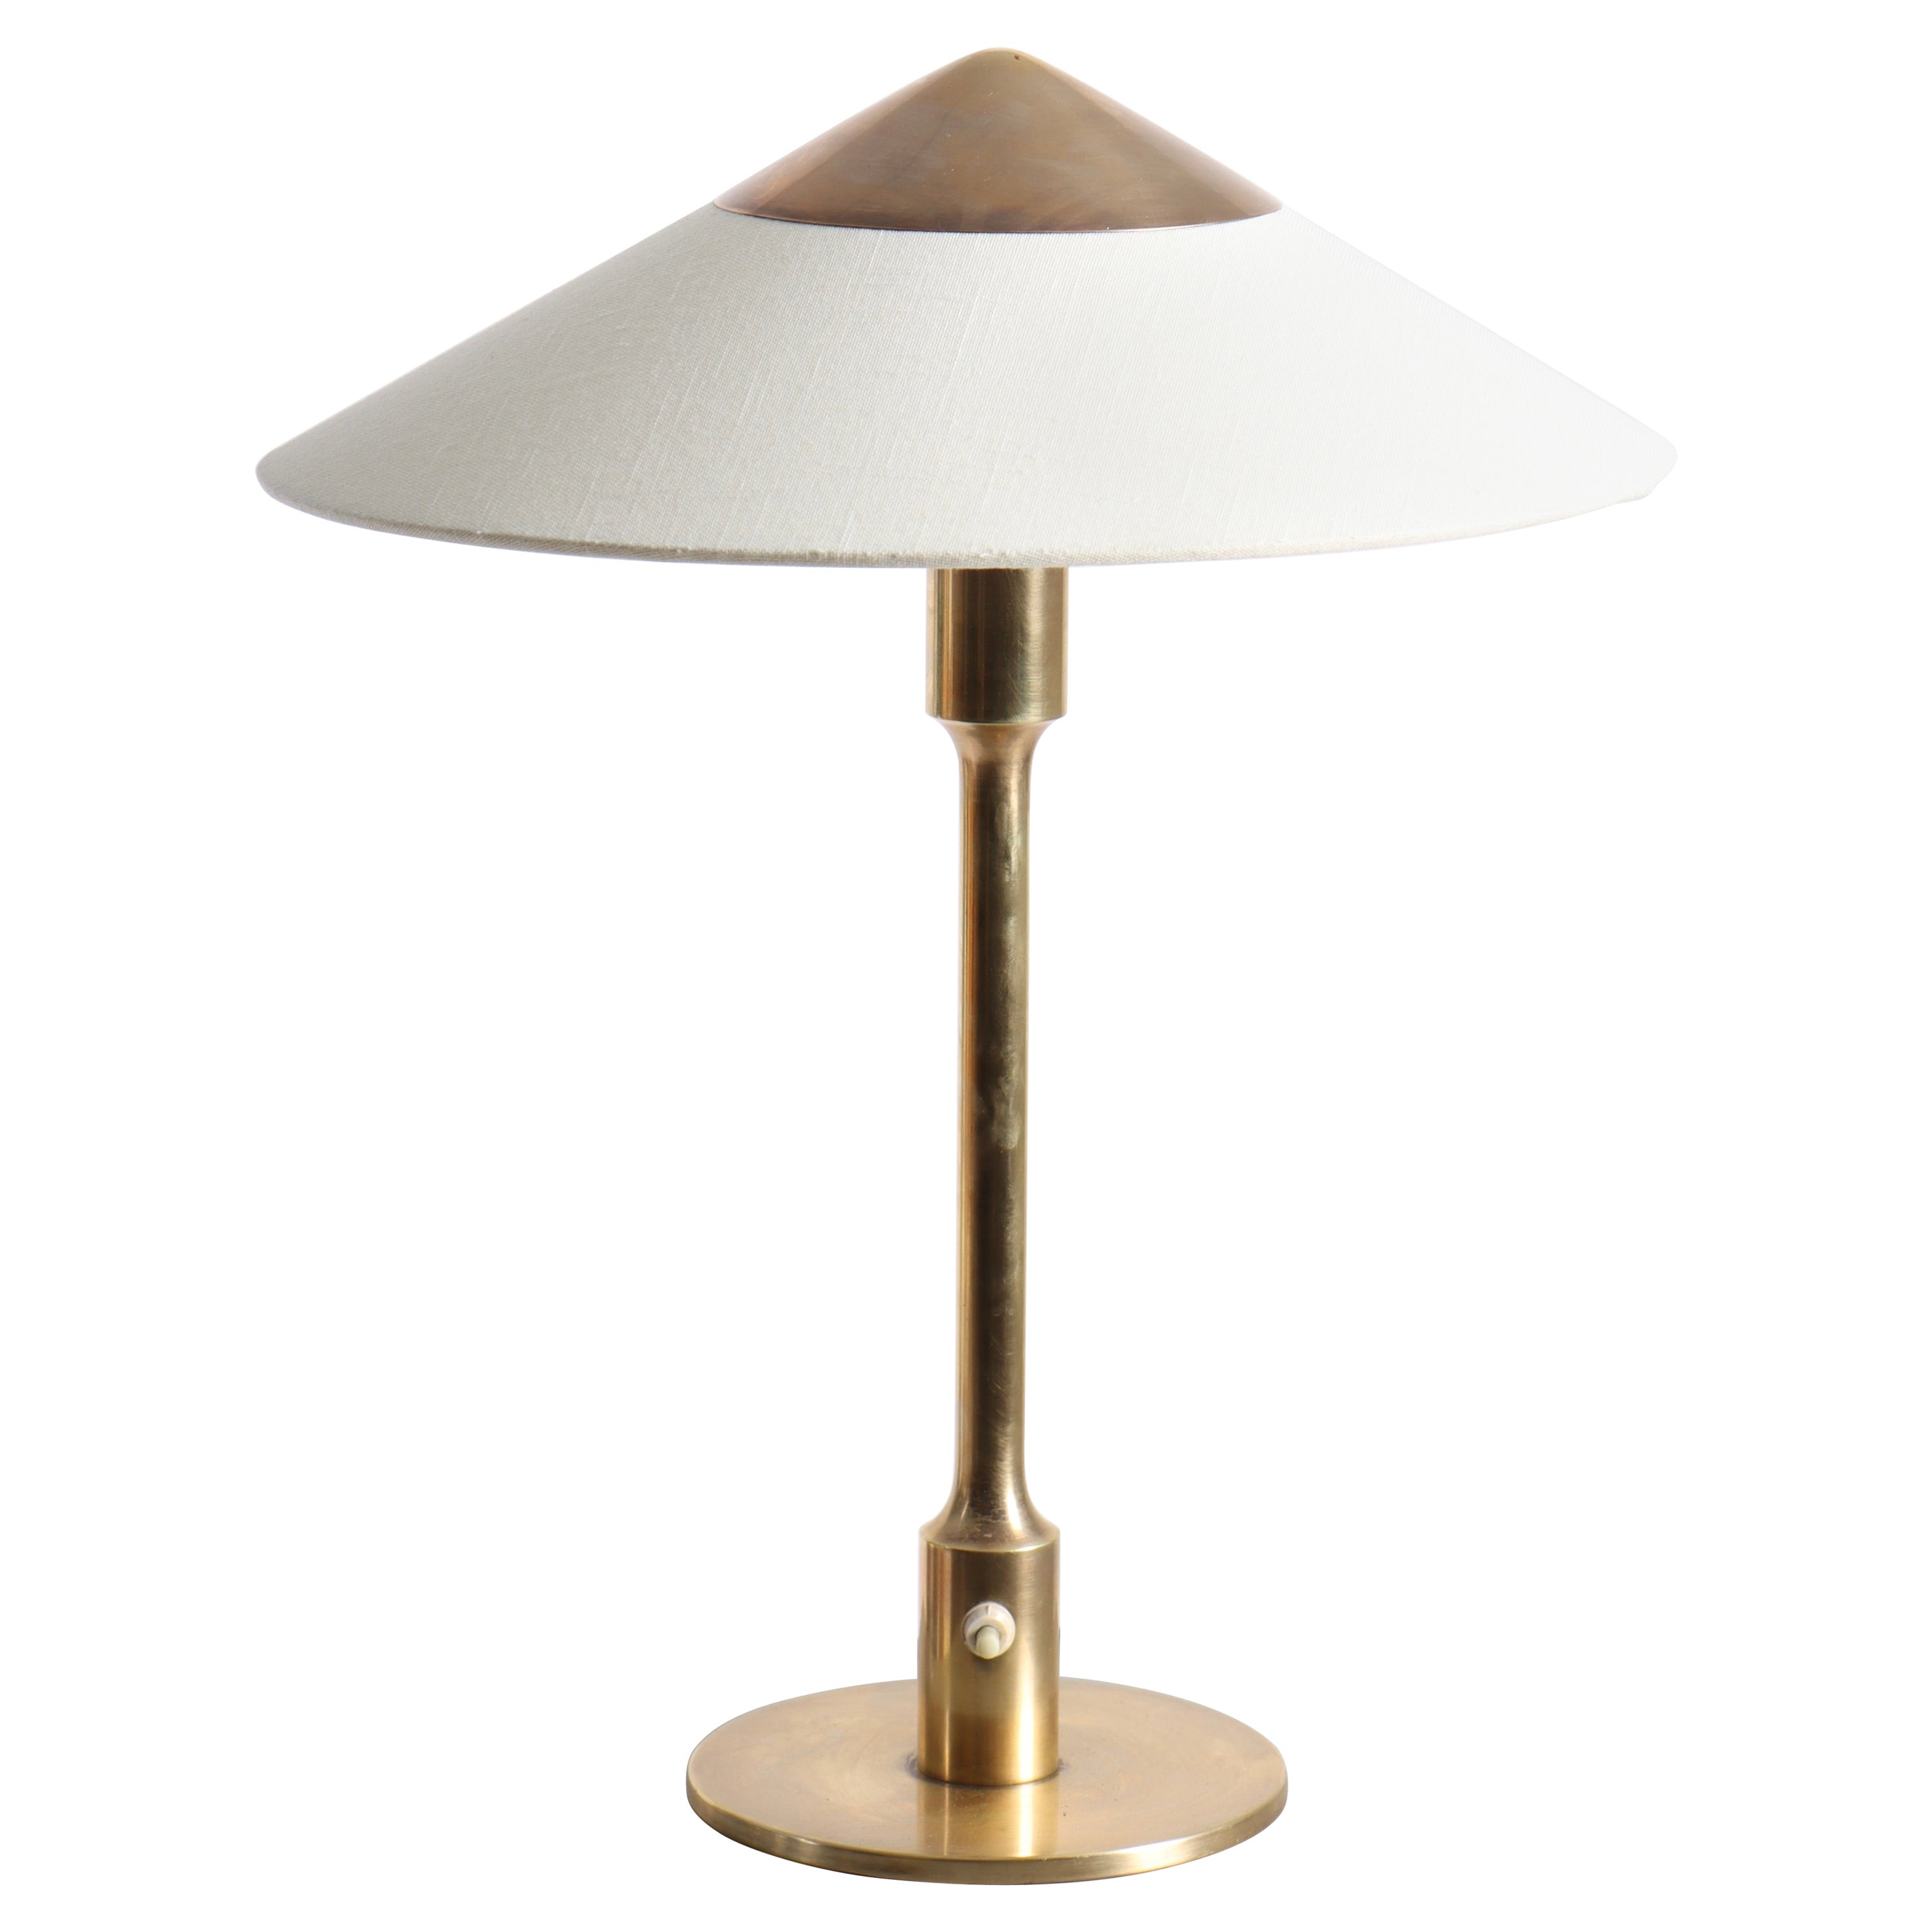 Mid-Century Danish Table Lamp in Brass, 1950s For Sale